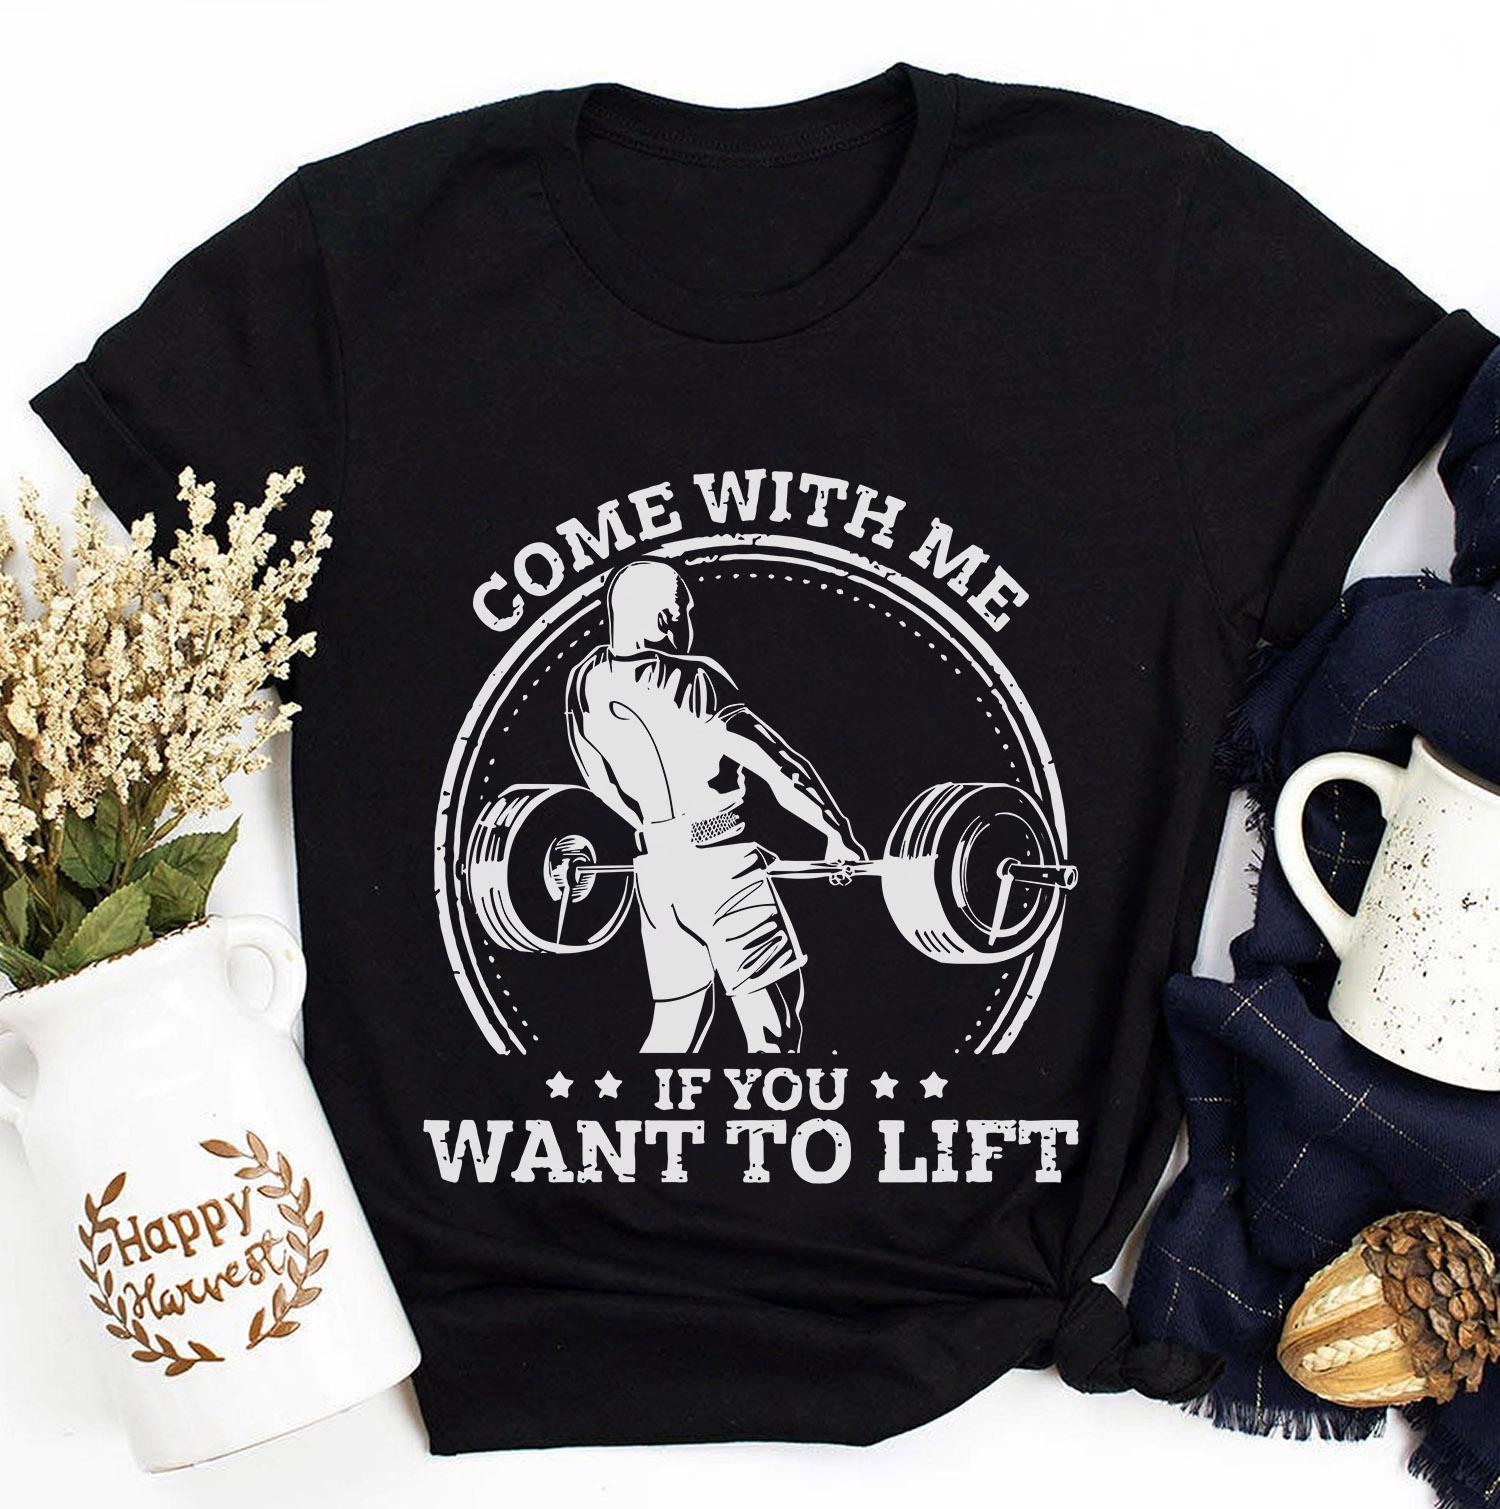 Come with me if you want to lift - Gift for bodybuilders, man lifting weights